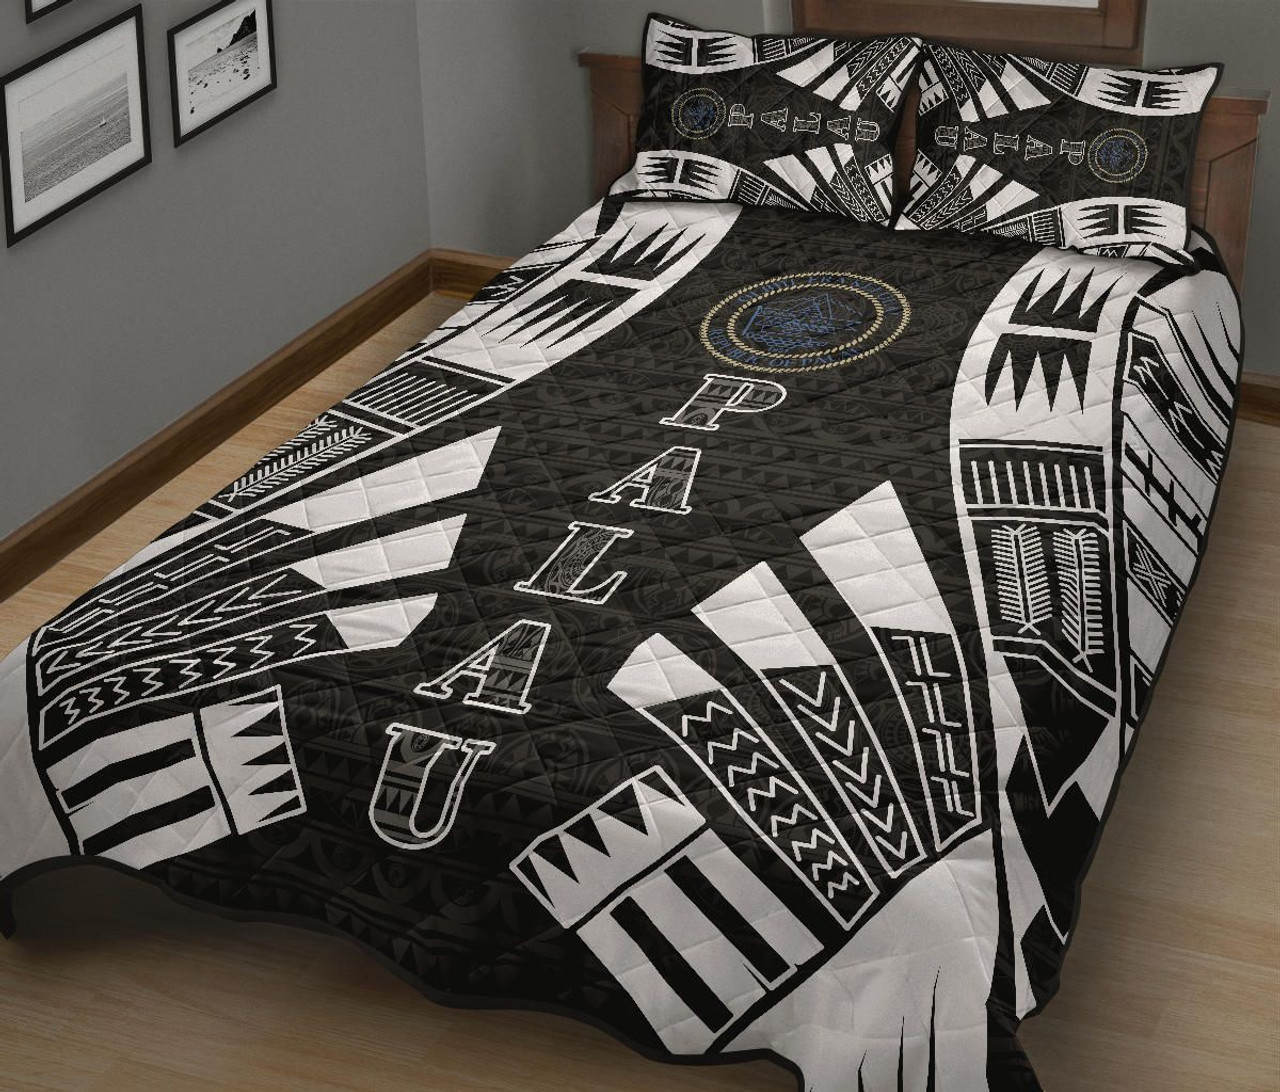 Northern Mariana Islands Quilt Bed Set - Northern Mariana Islands Seal & Polynesian White Tattoo Style 3